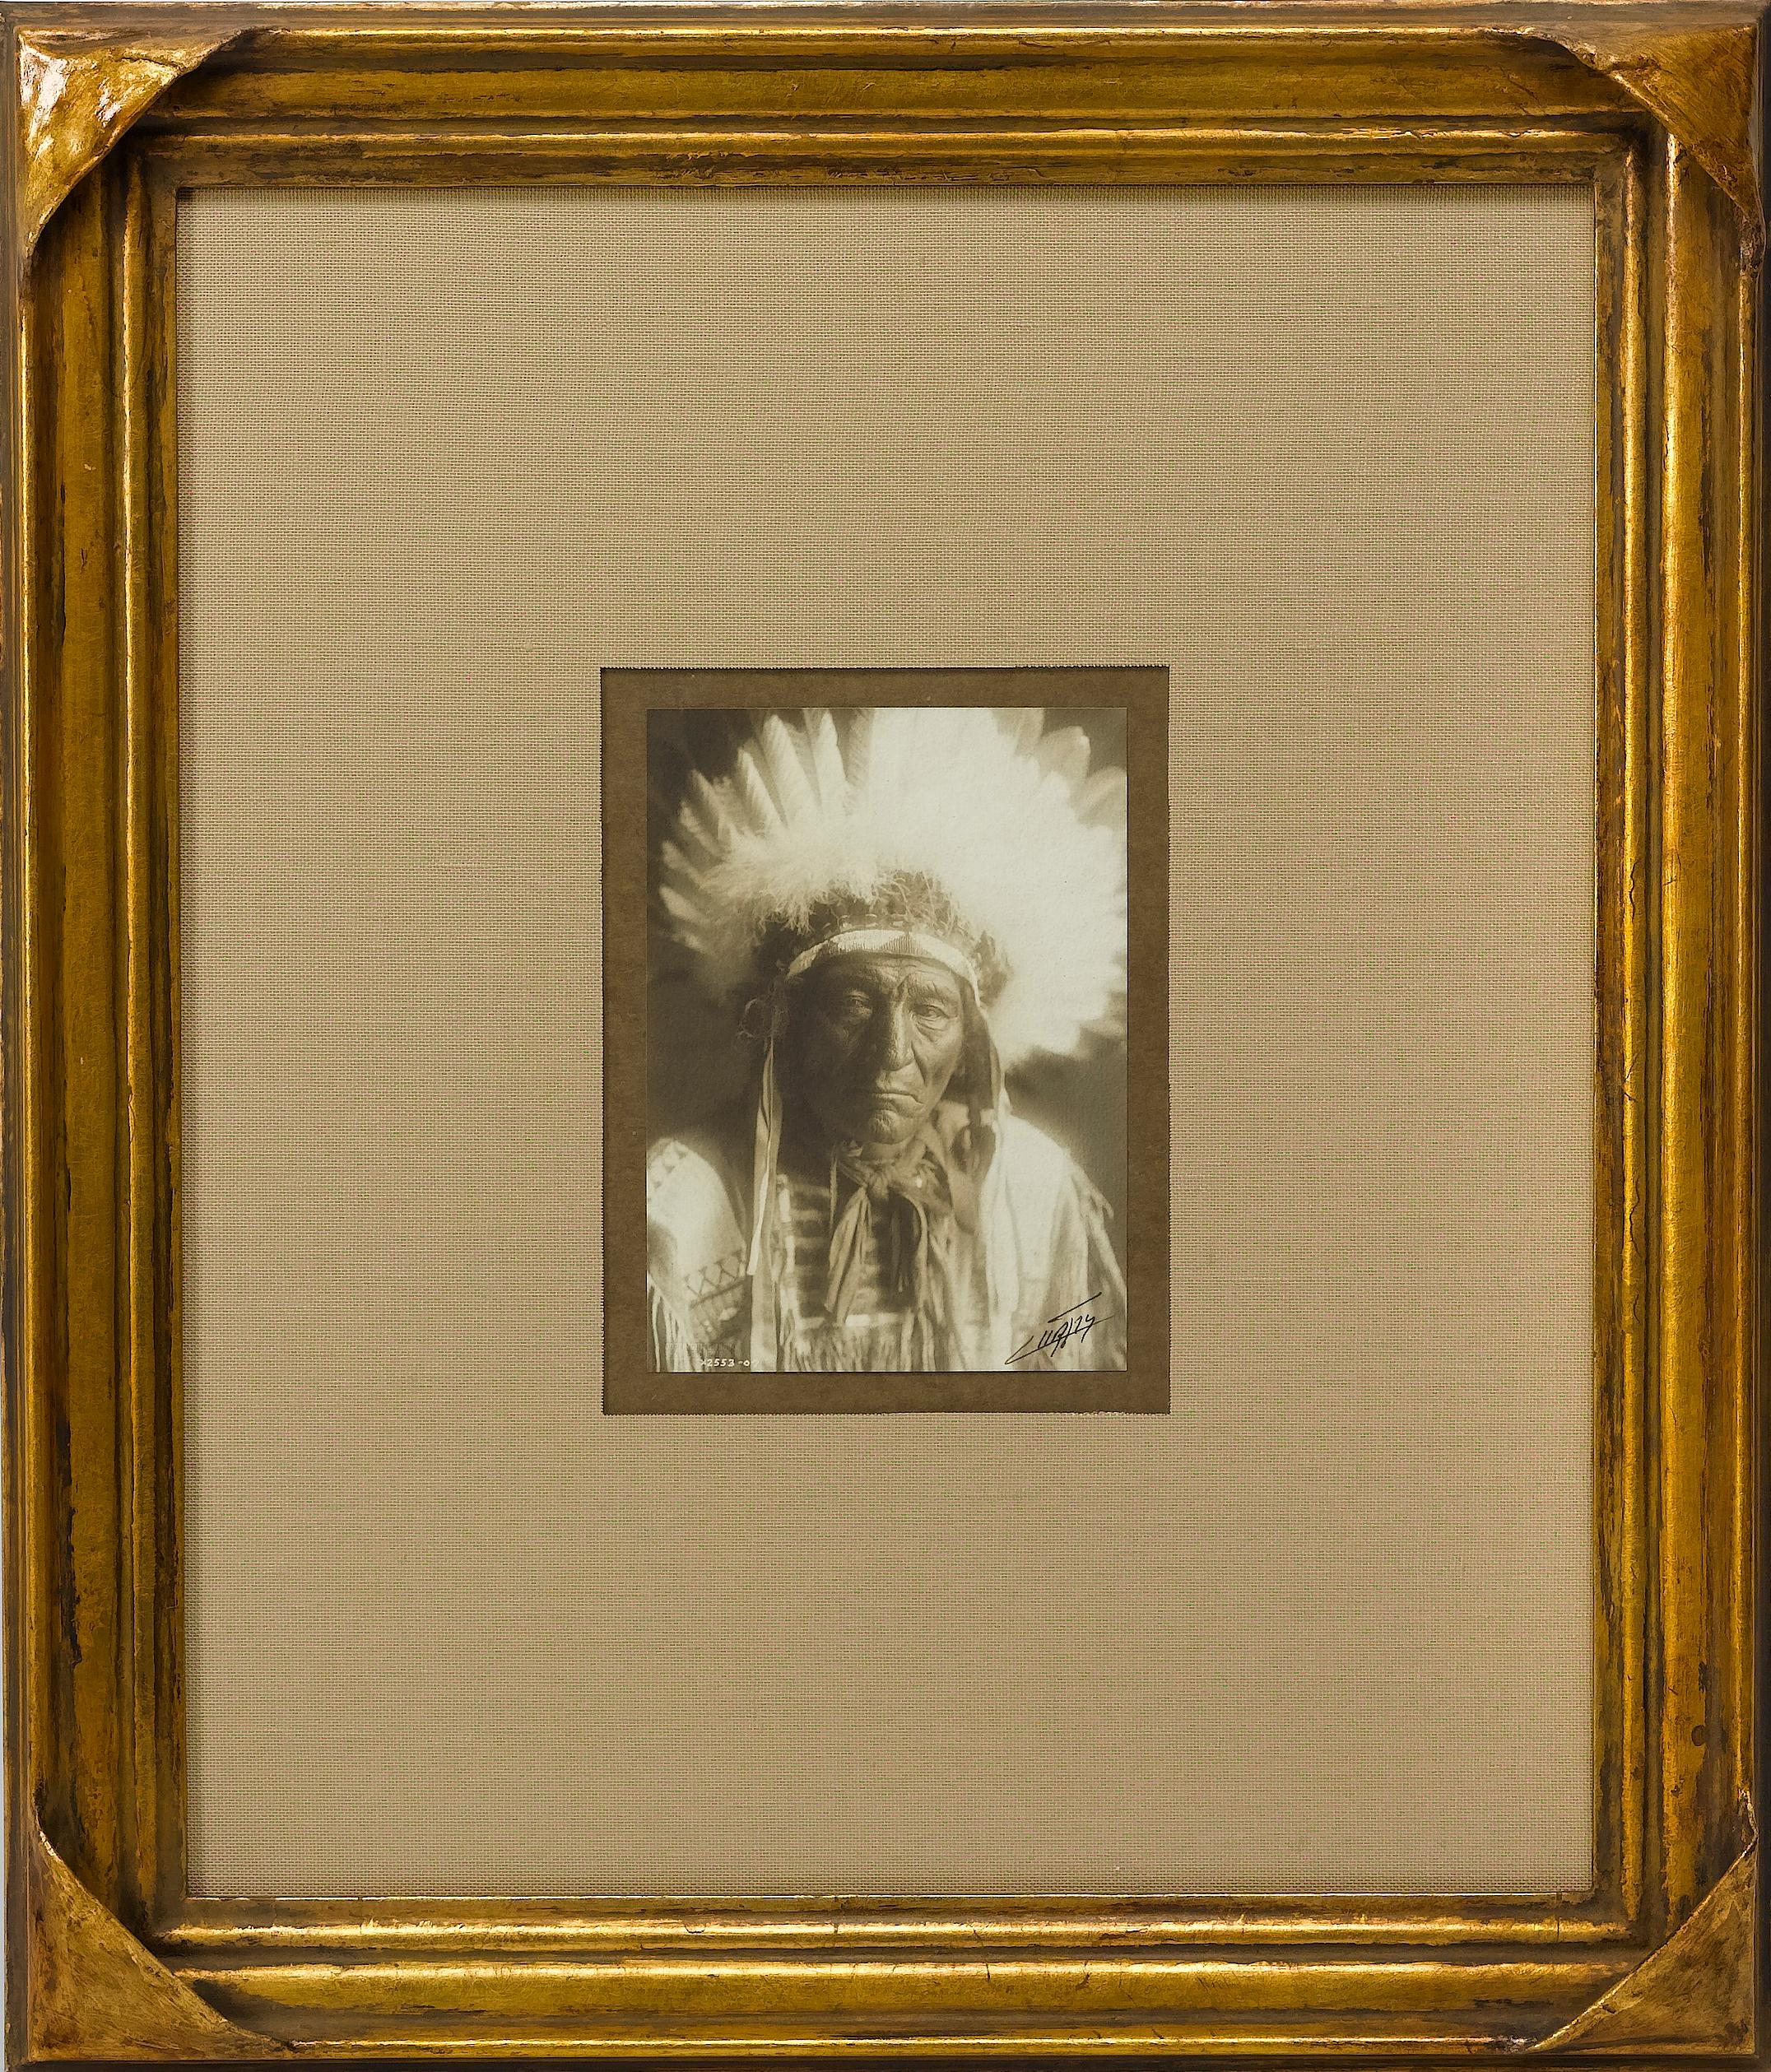 American Edward S. Curtis Signed Photograph of Apsaroke Indian Chief